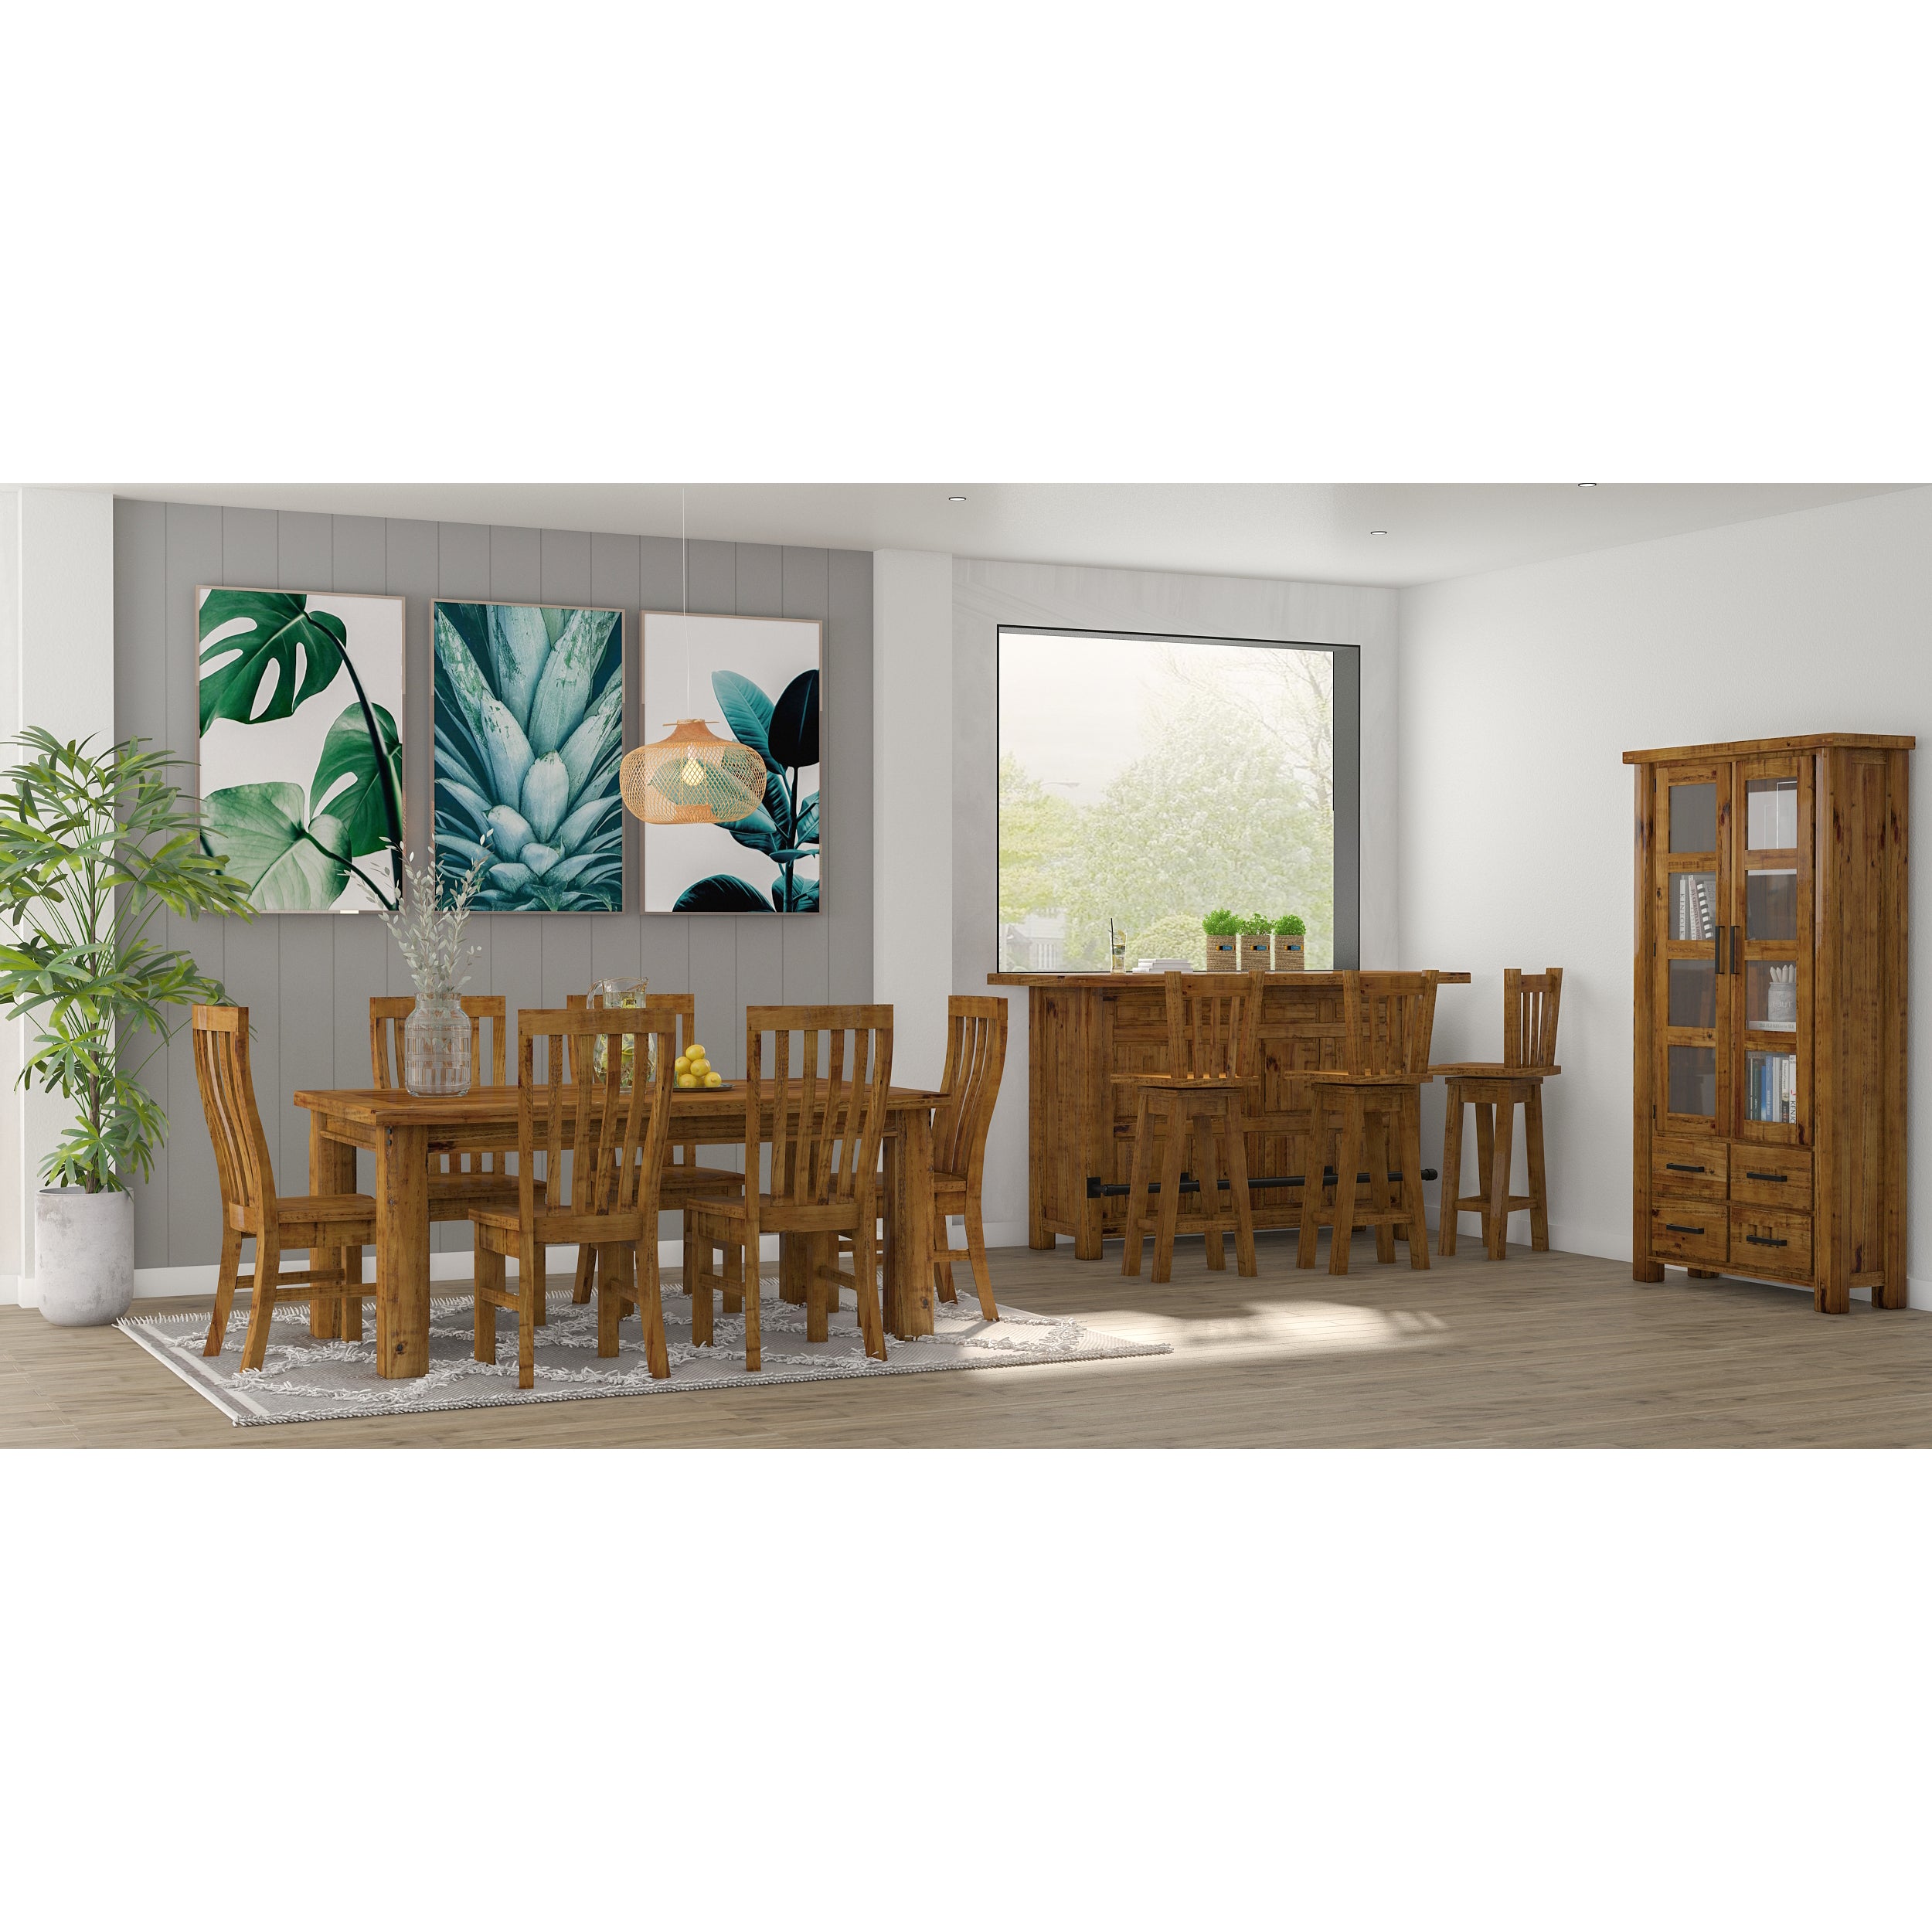 Teasel 9pc Dining Set 210cm Table 8 Chair Solid Pine Wood Timber - Rustic Oak